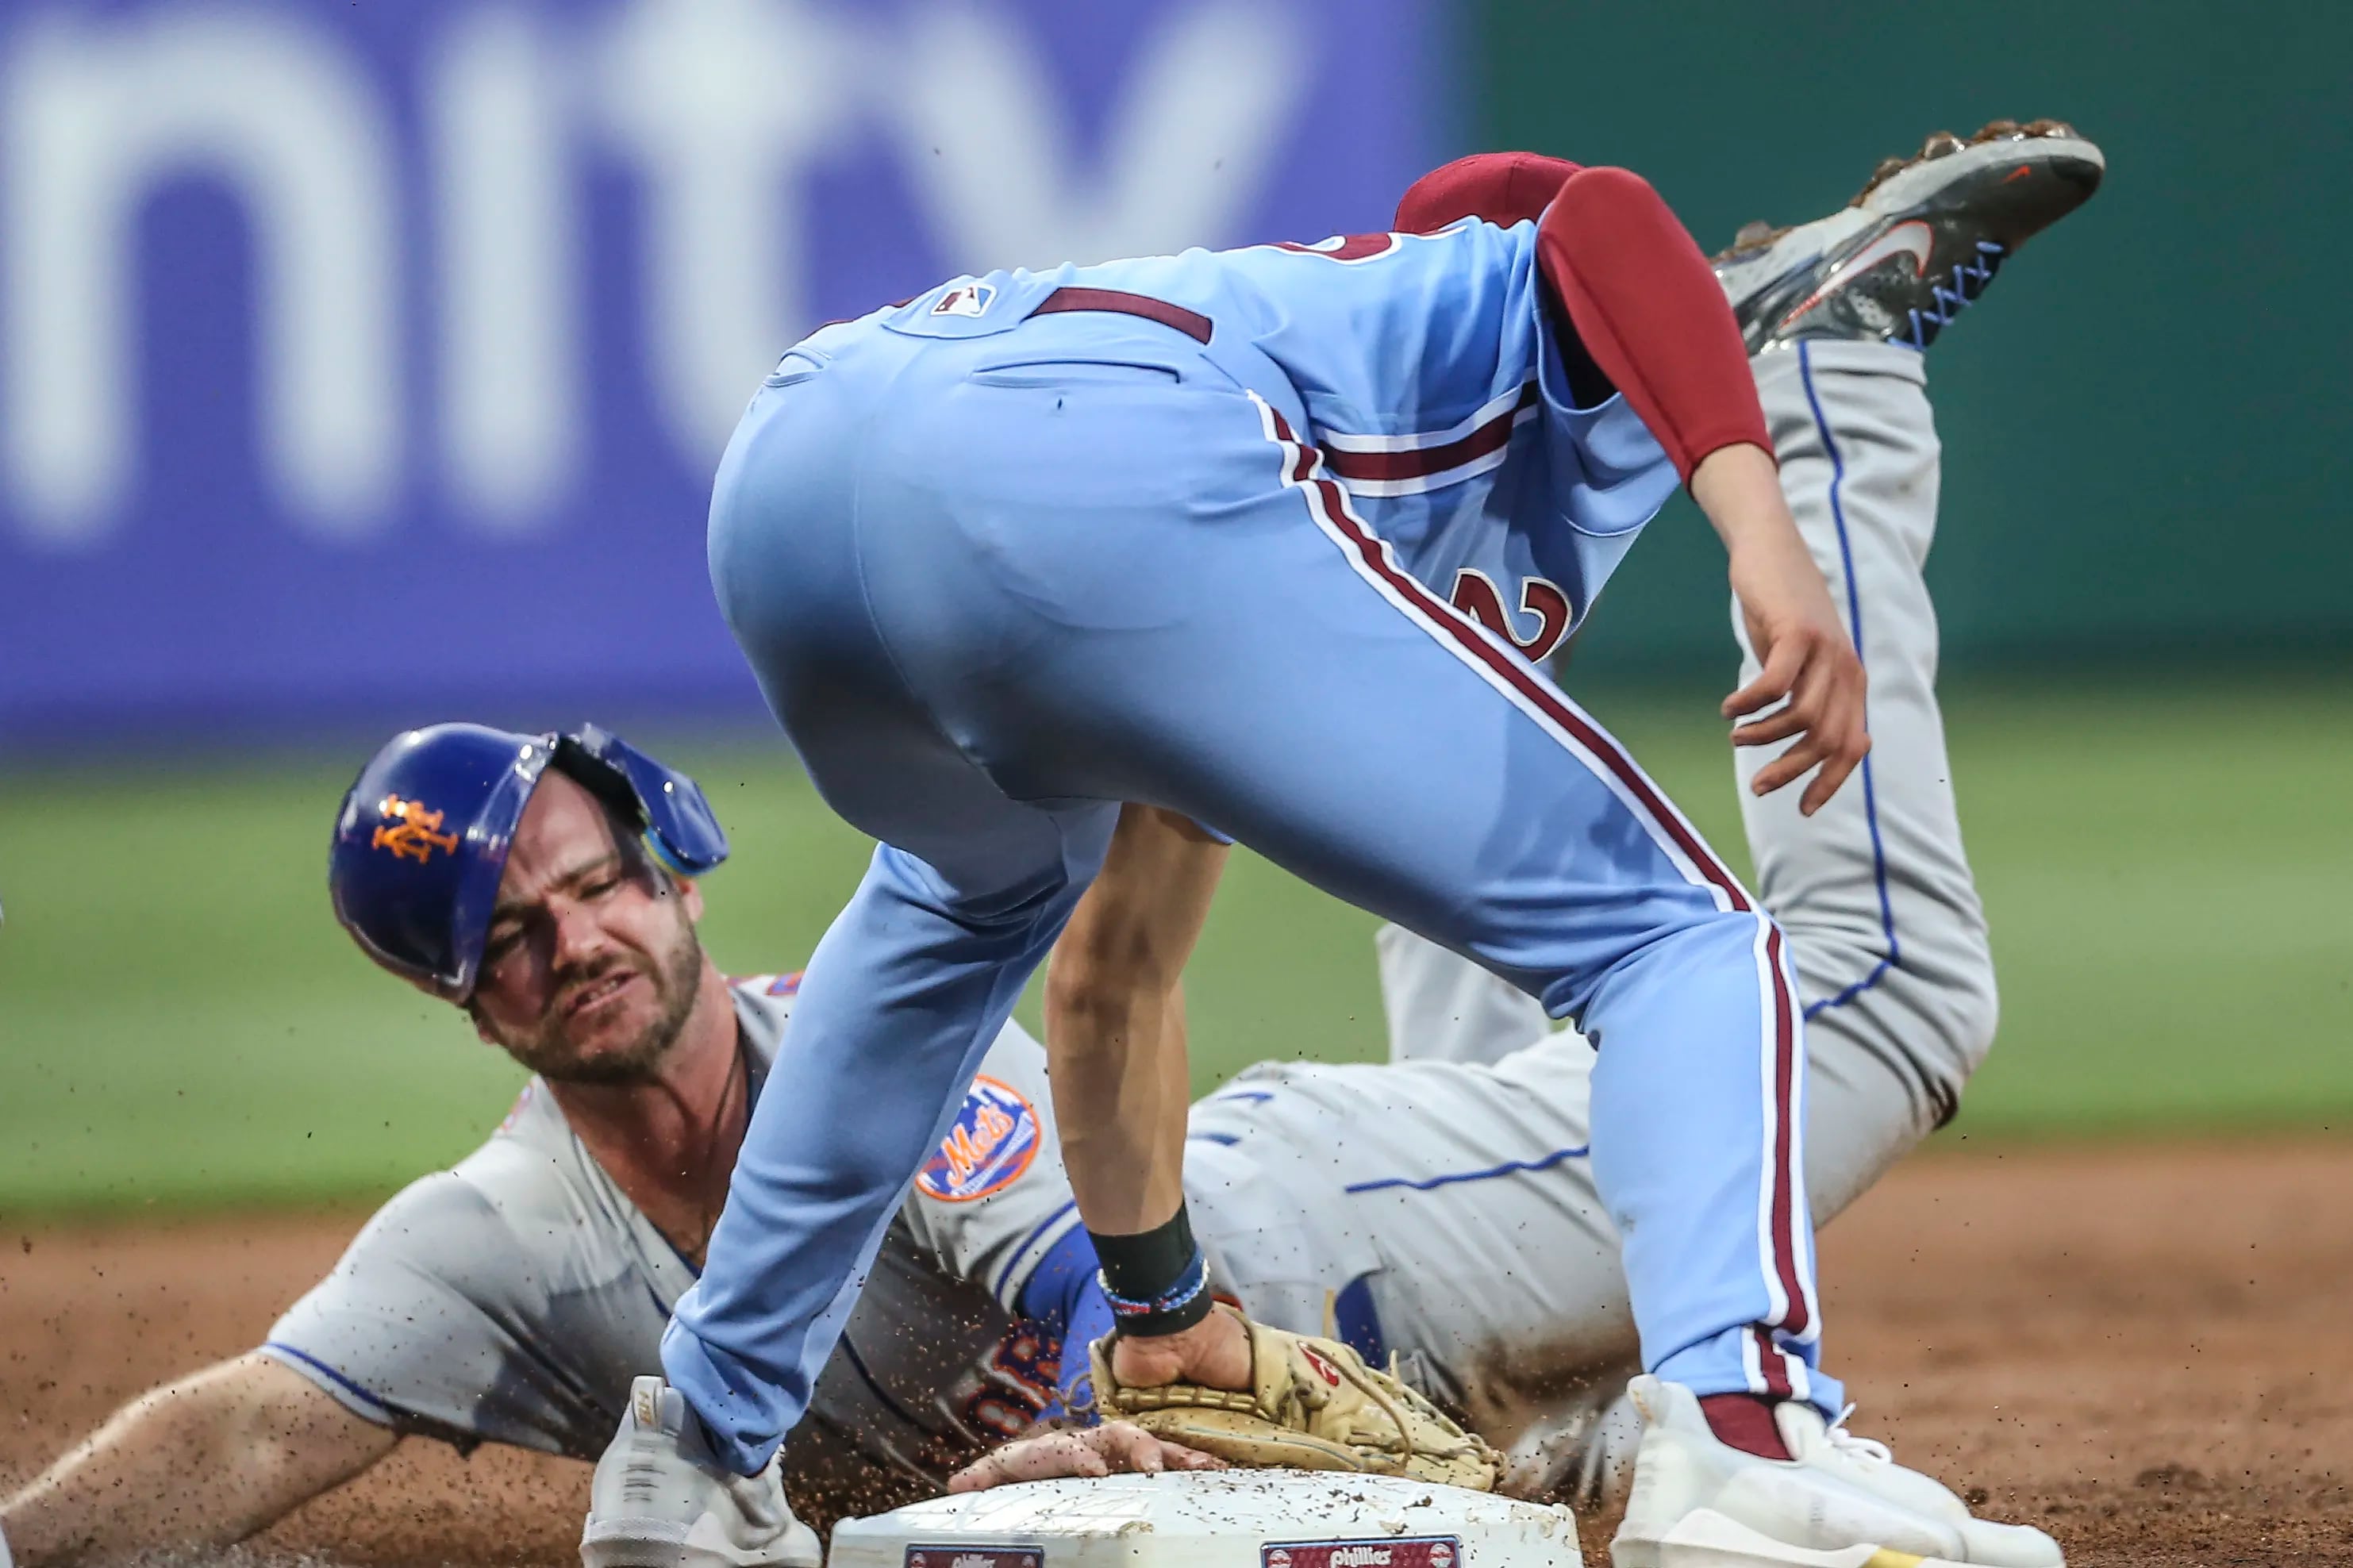 Photos of the Phillies falling to the Mets